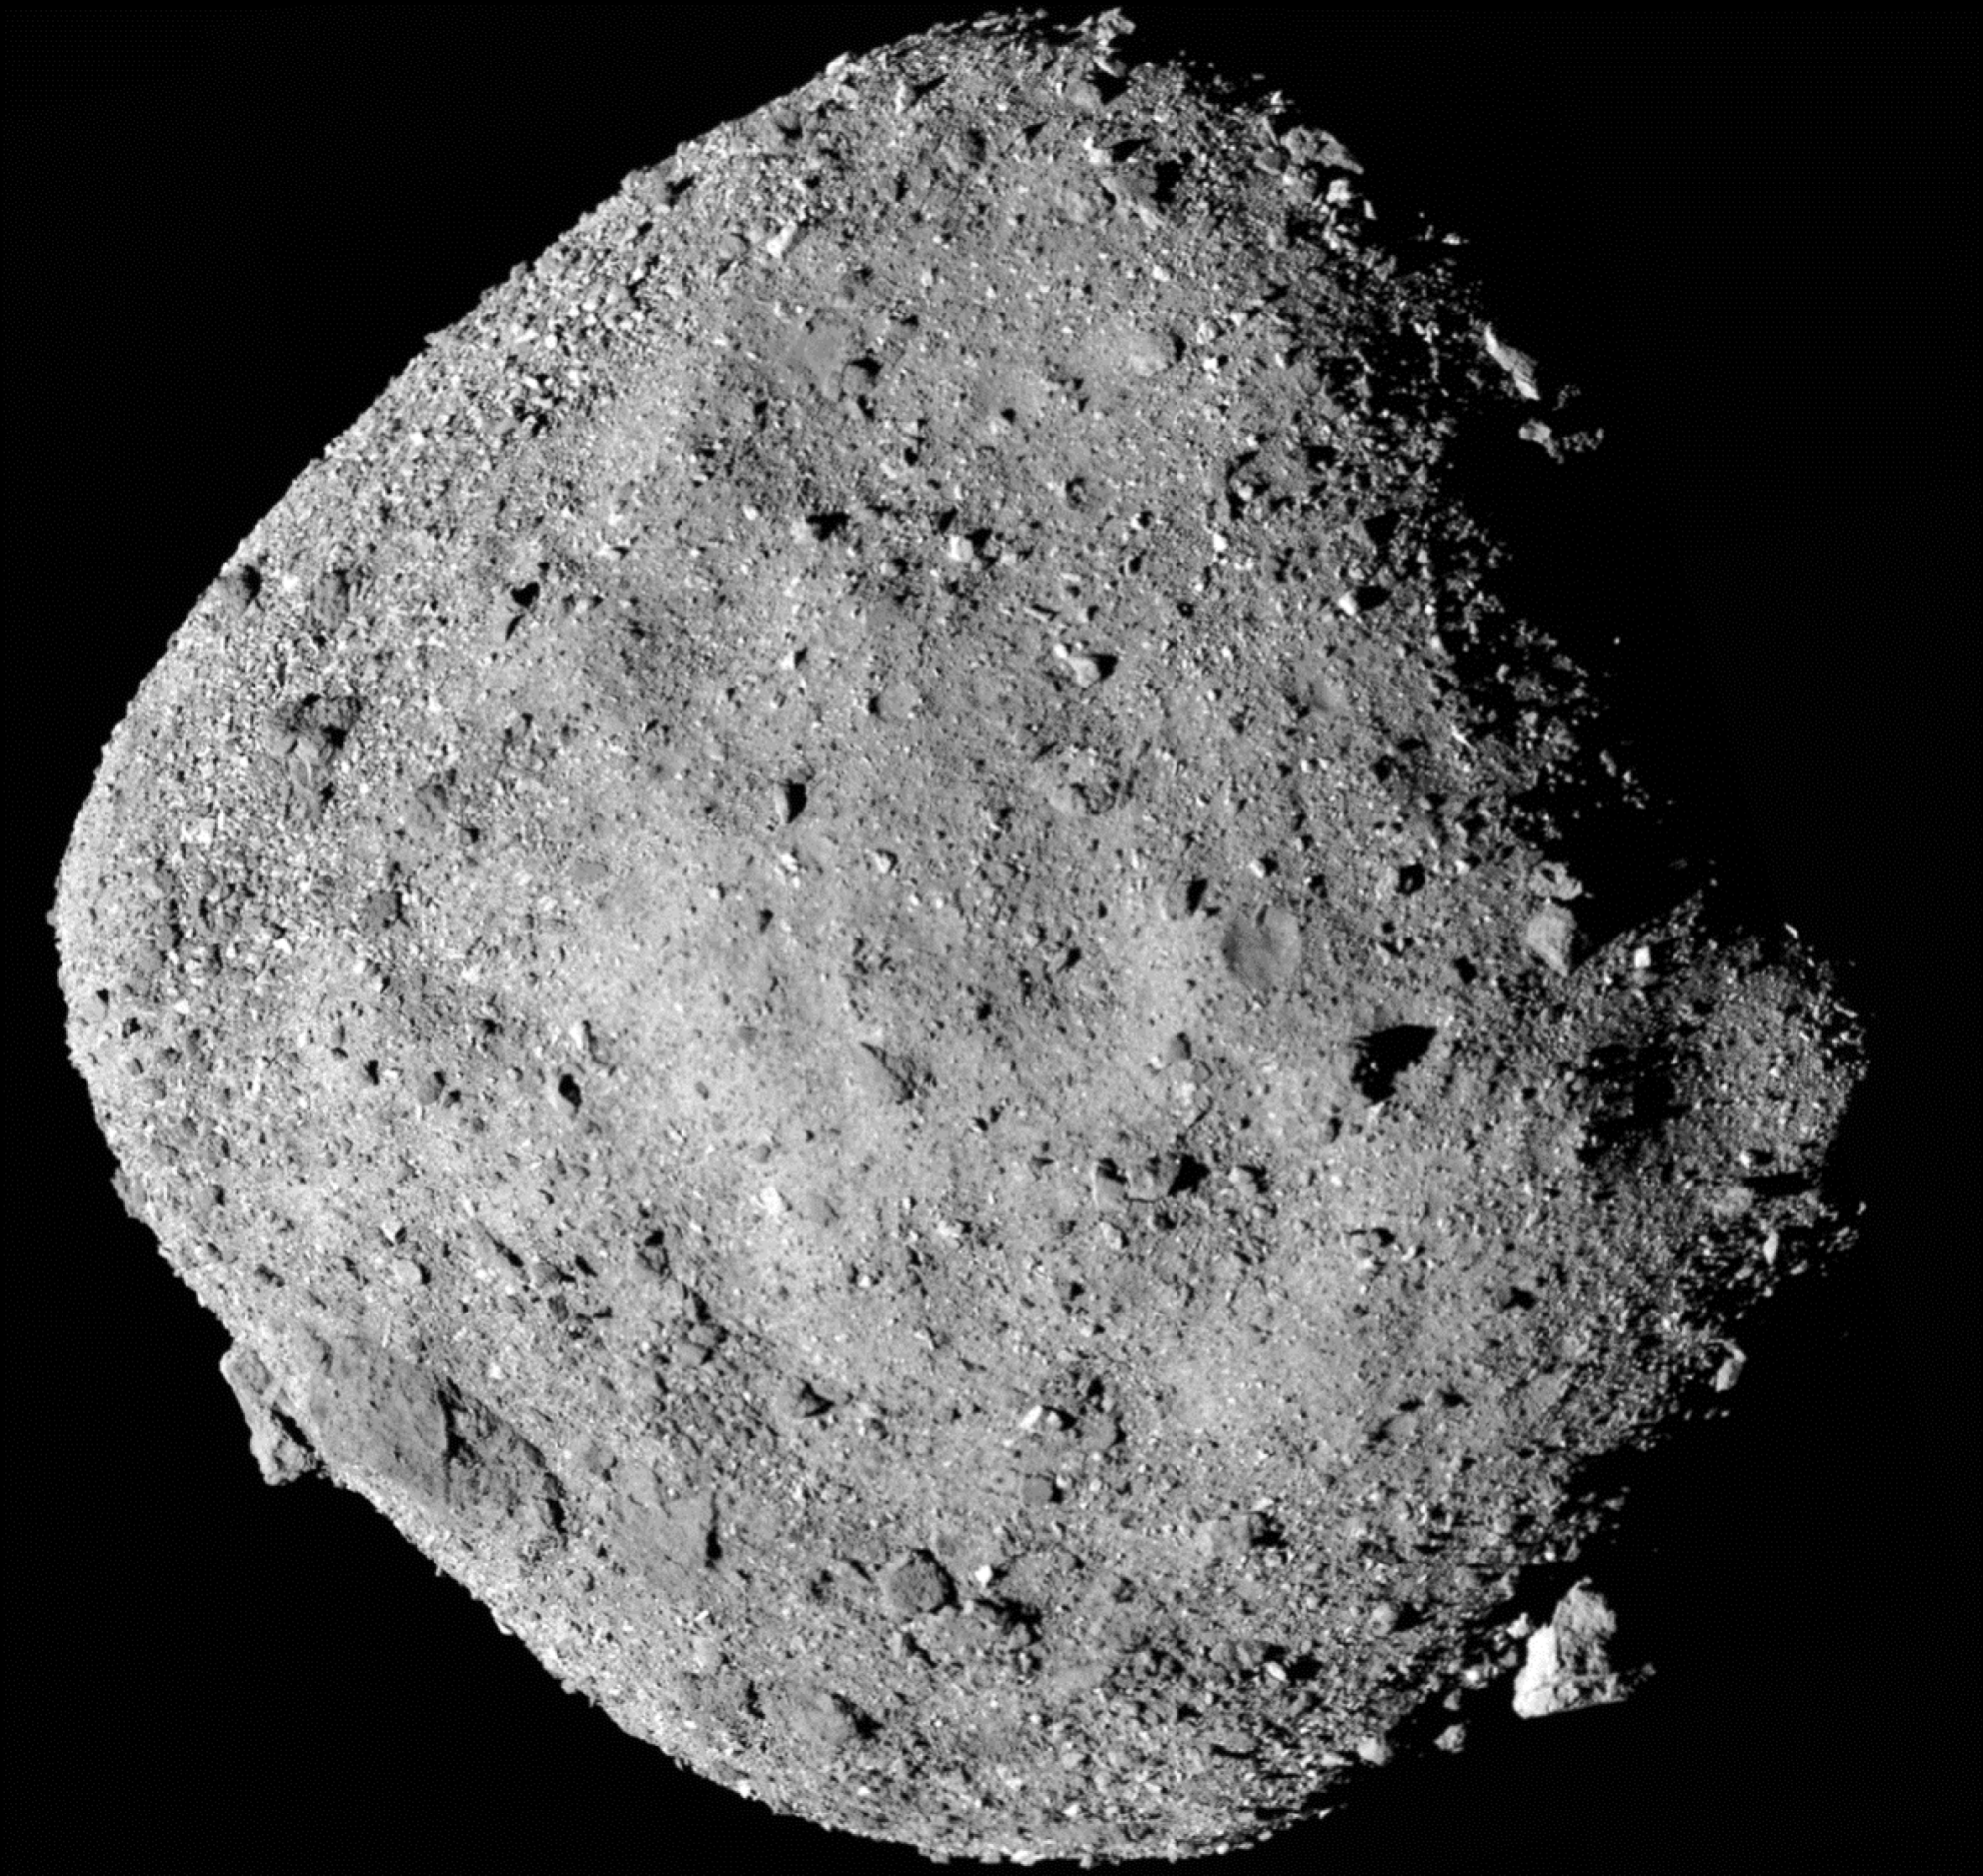 How to watch NASA bring back asteroid Bennu specimens to Earth